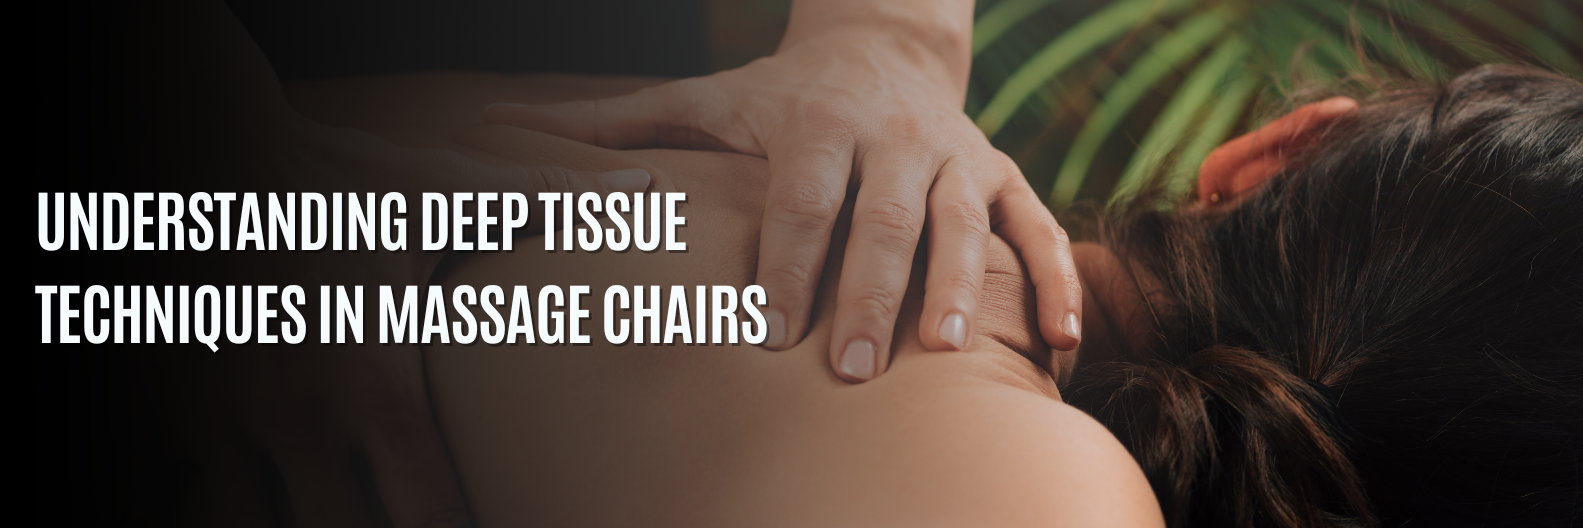 By employing advanced Massage Chair Techniques, deep tissue massage chairs provide a deep, therapeutic experience to relieve stress and pain. 